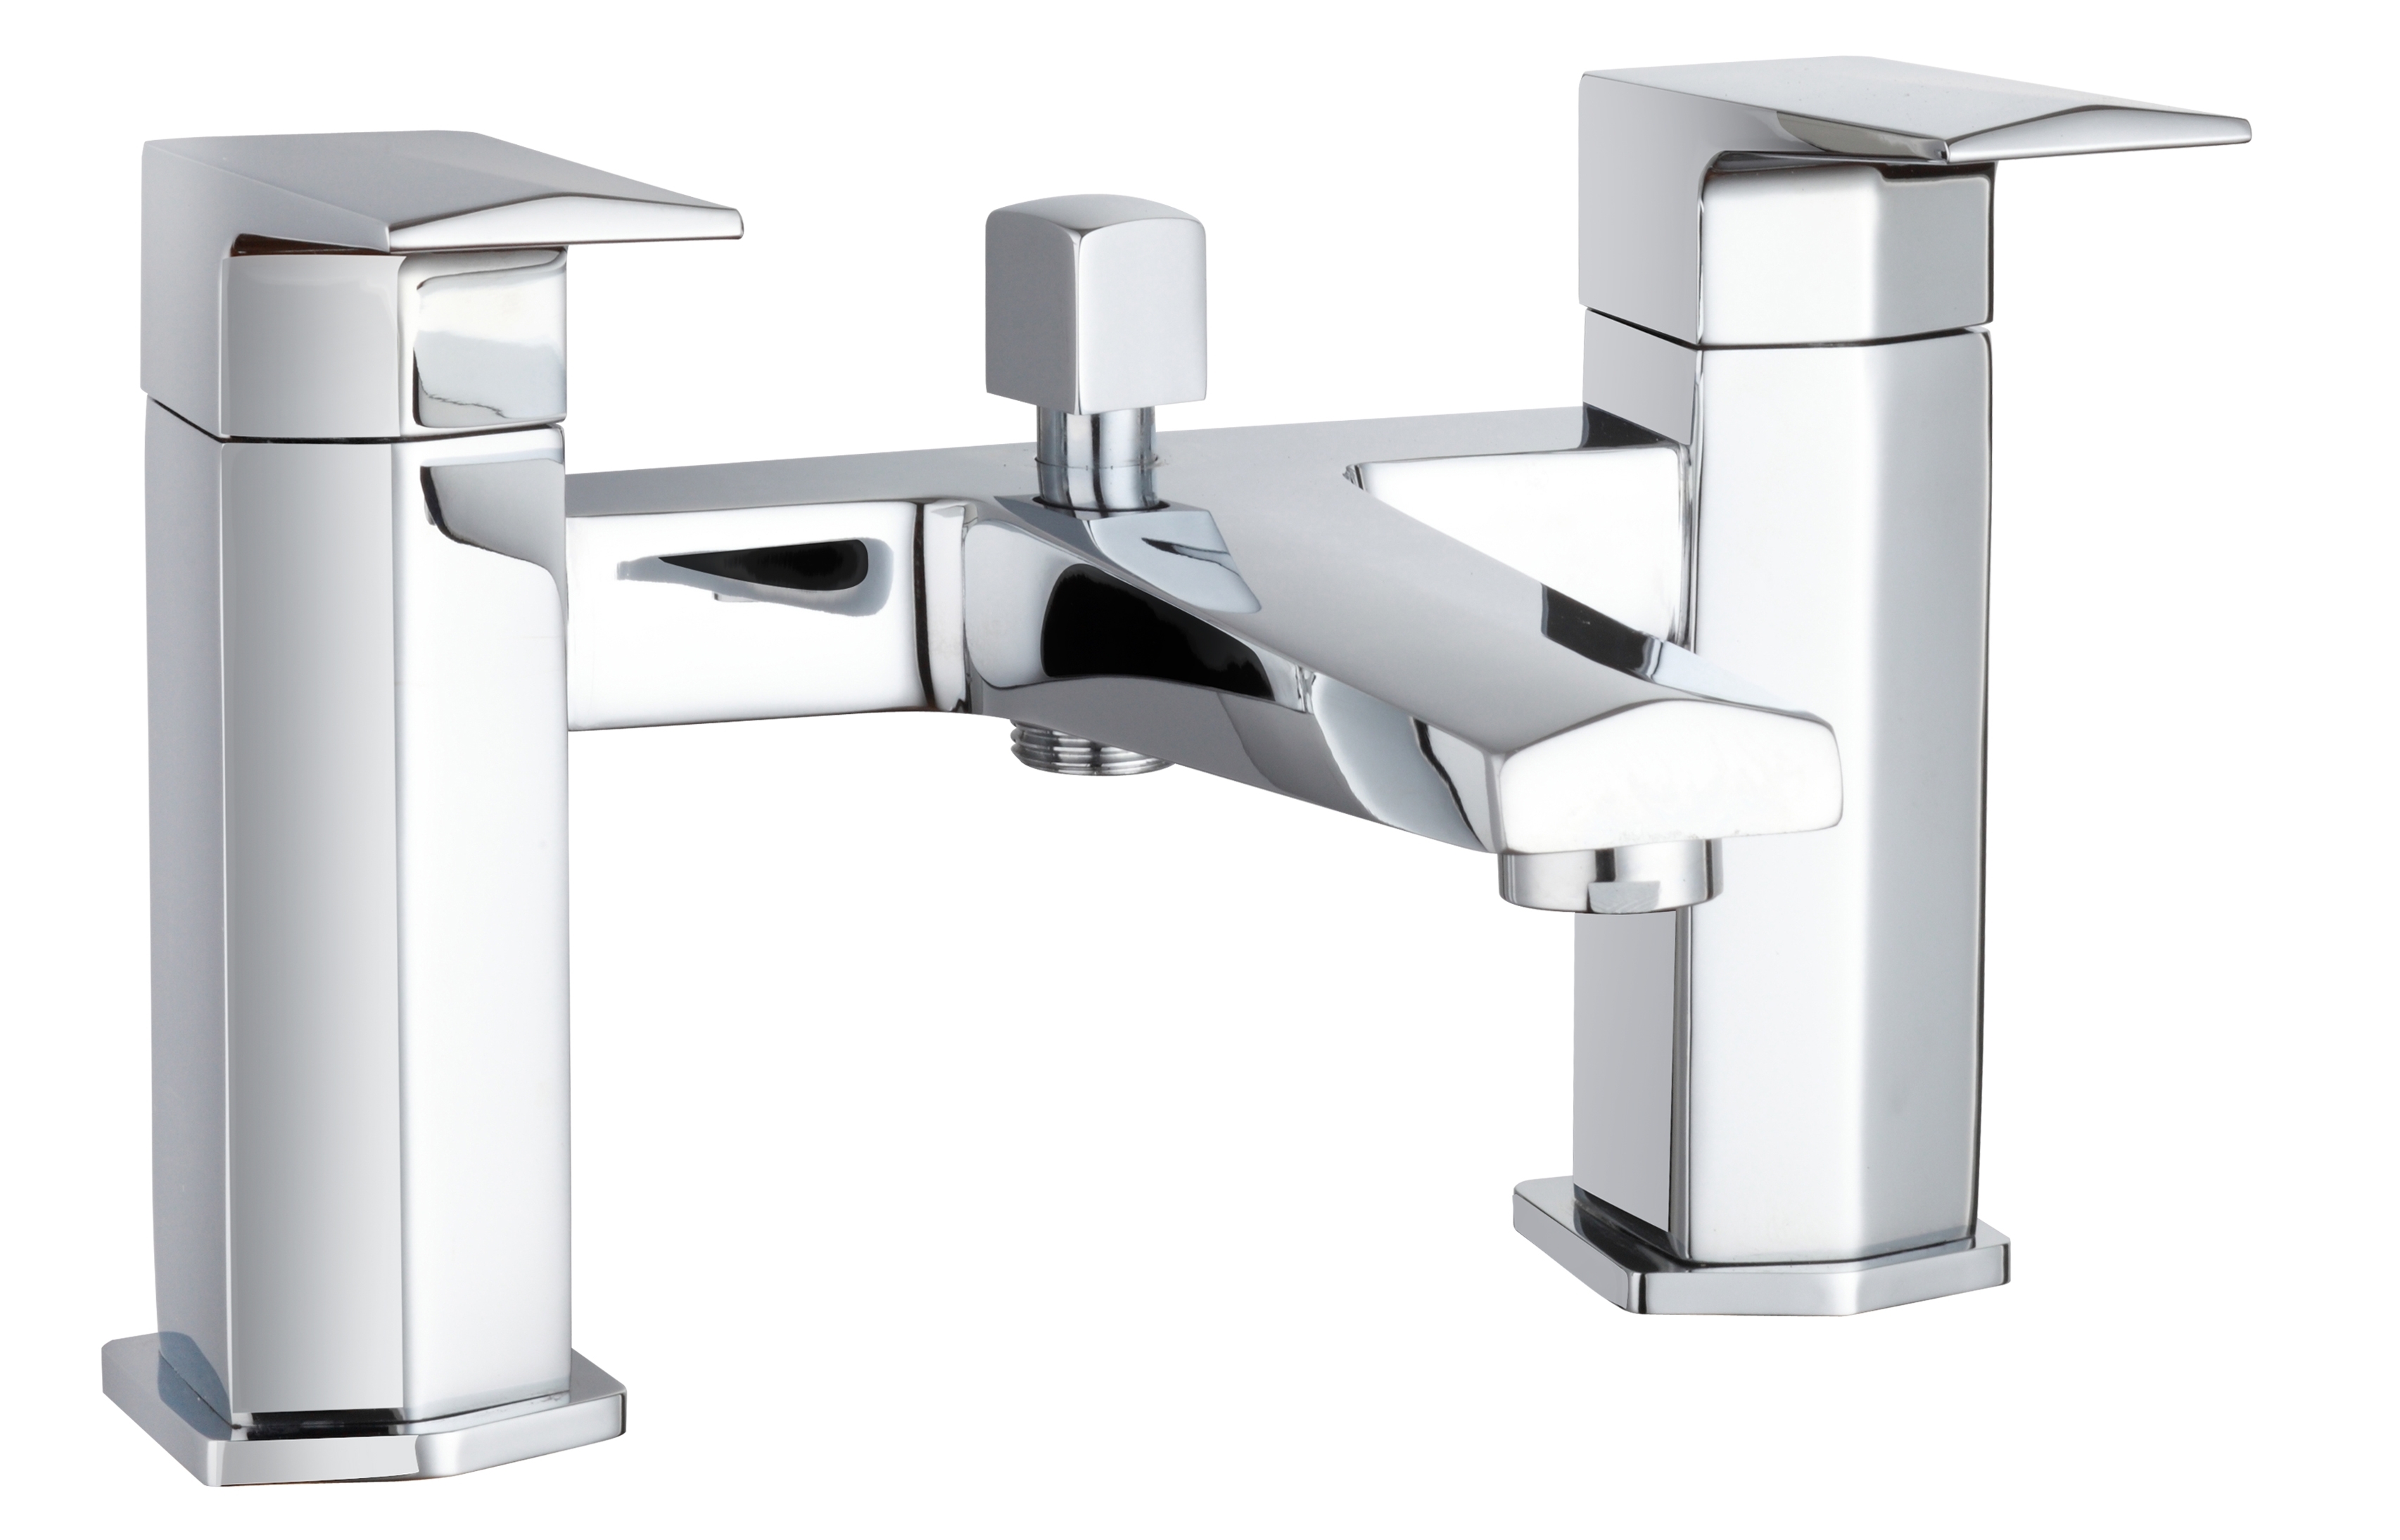 Nuie Pillar Mounted Hardy Bath Shower Mixer Tap - Chrome - HDY304 